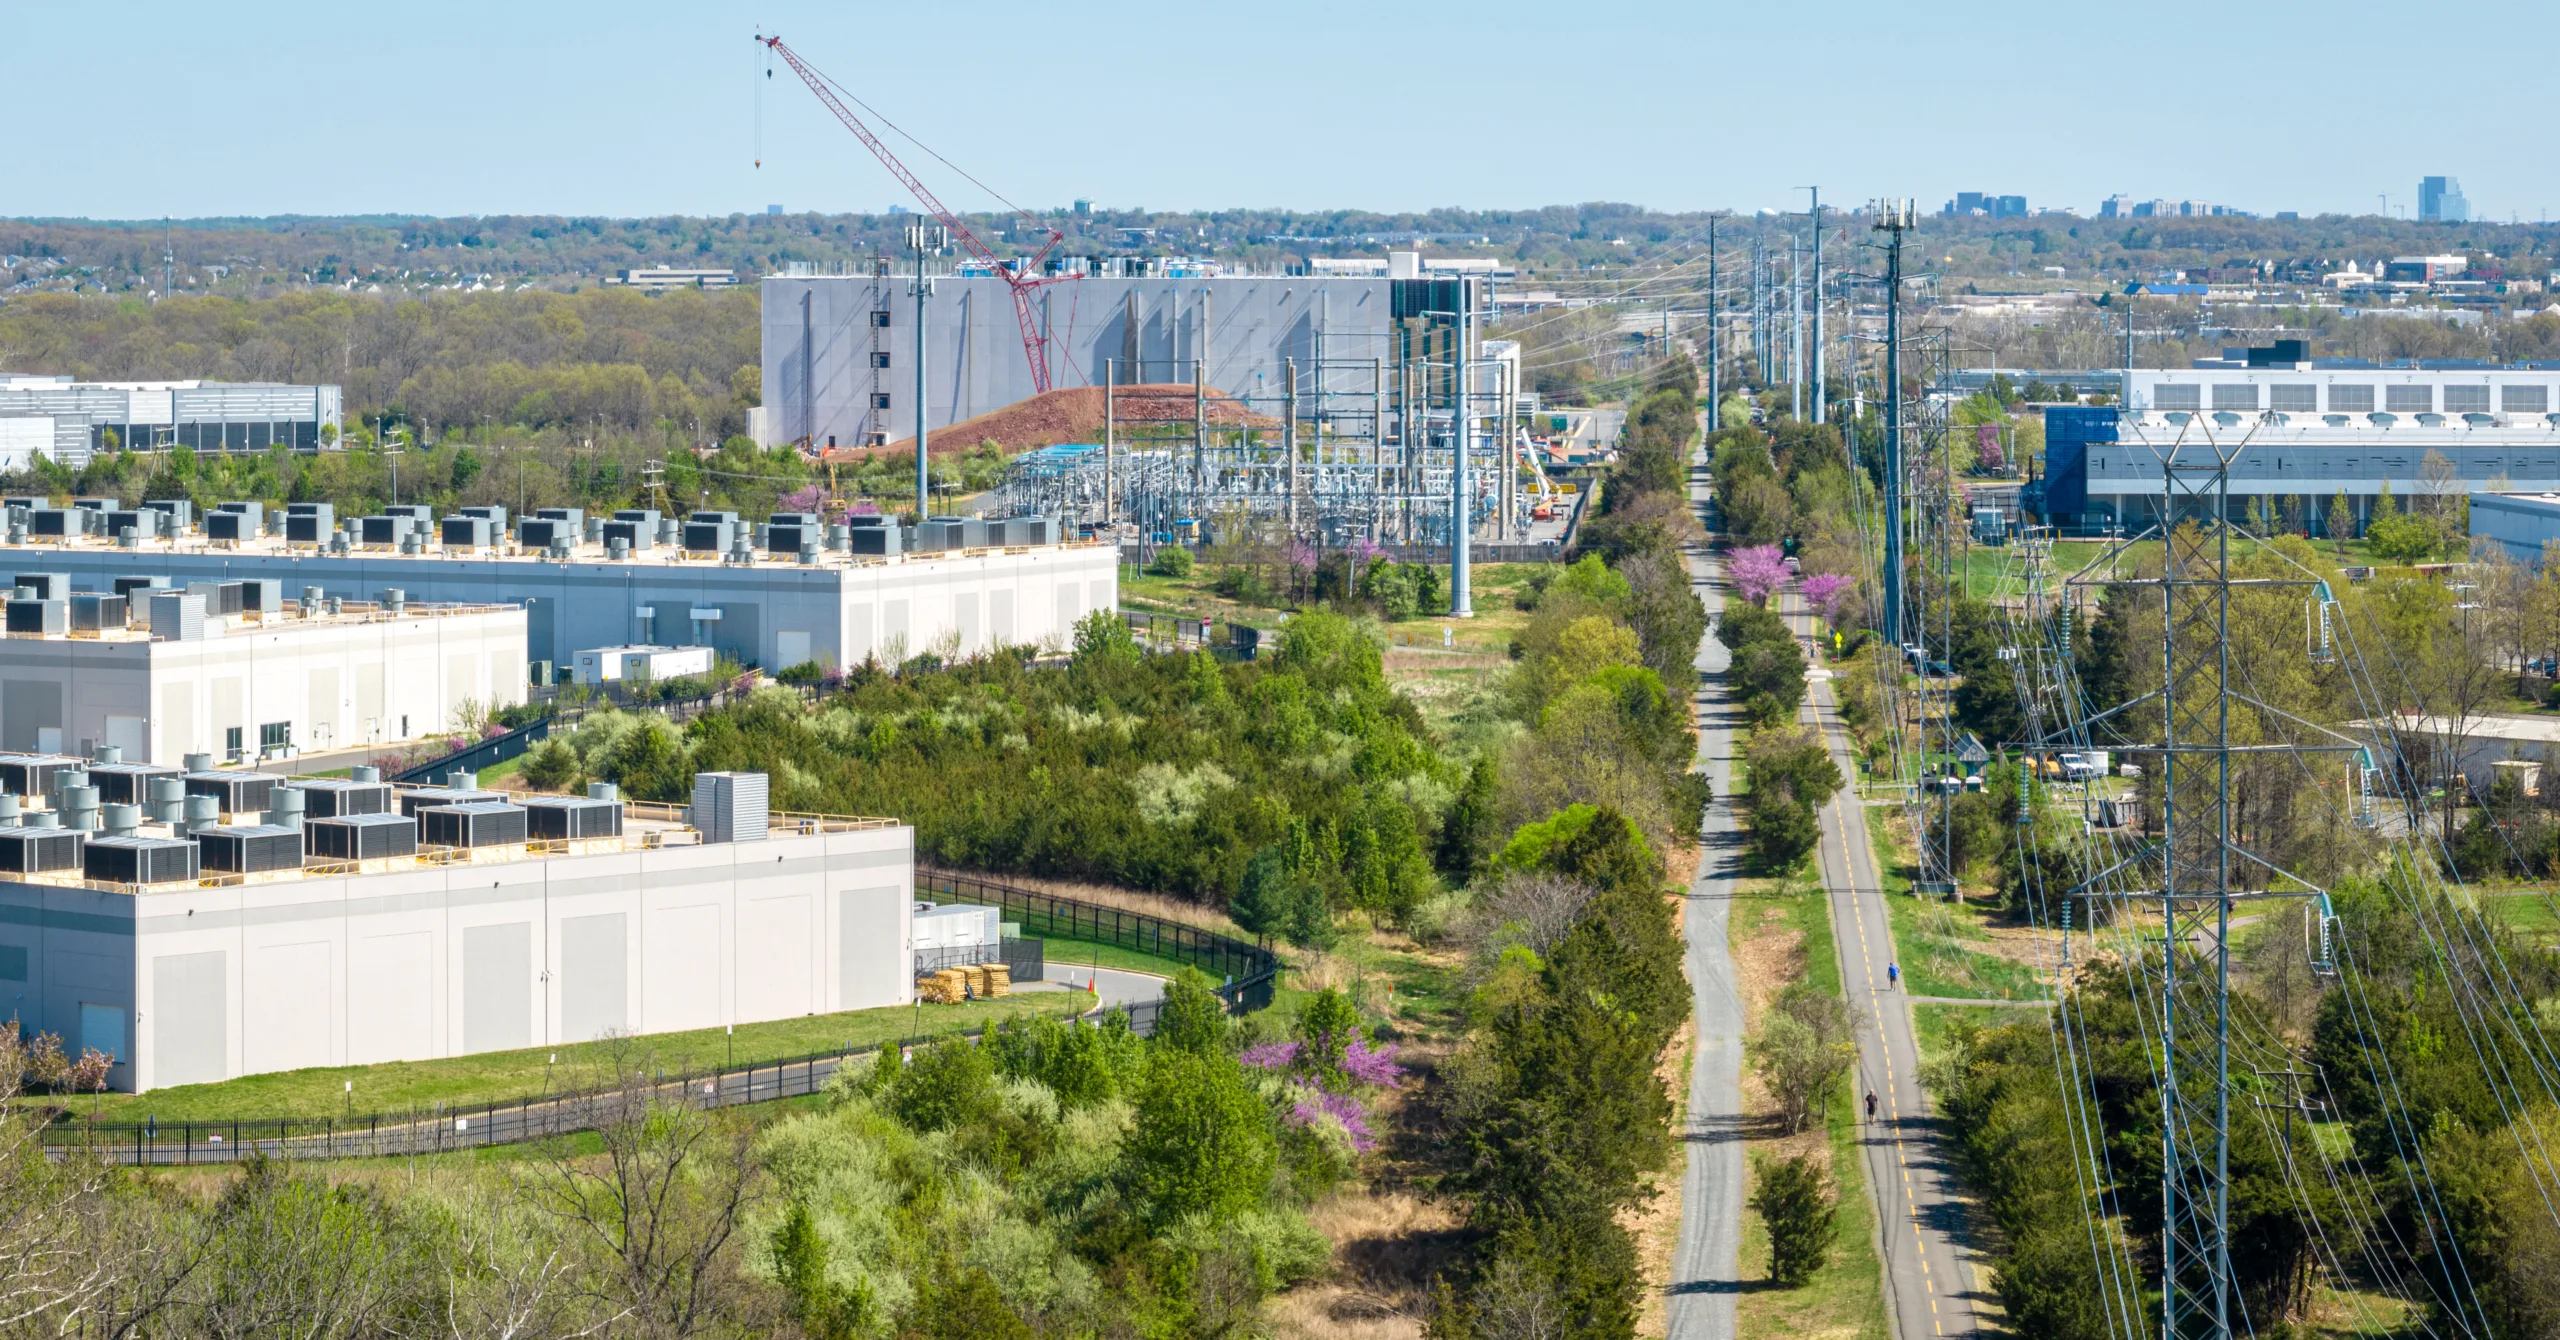 aerial photo looking out over 4 data center buildings and a transmission line running alongside a bike trail